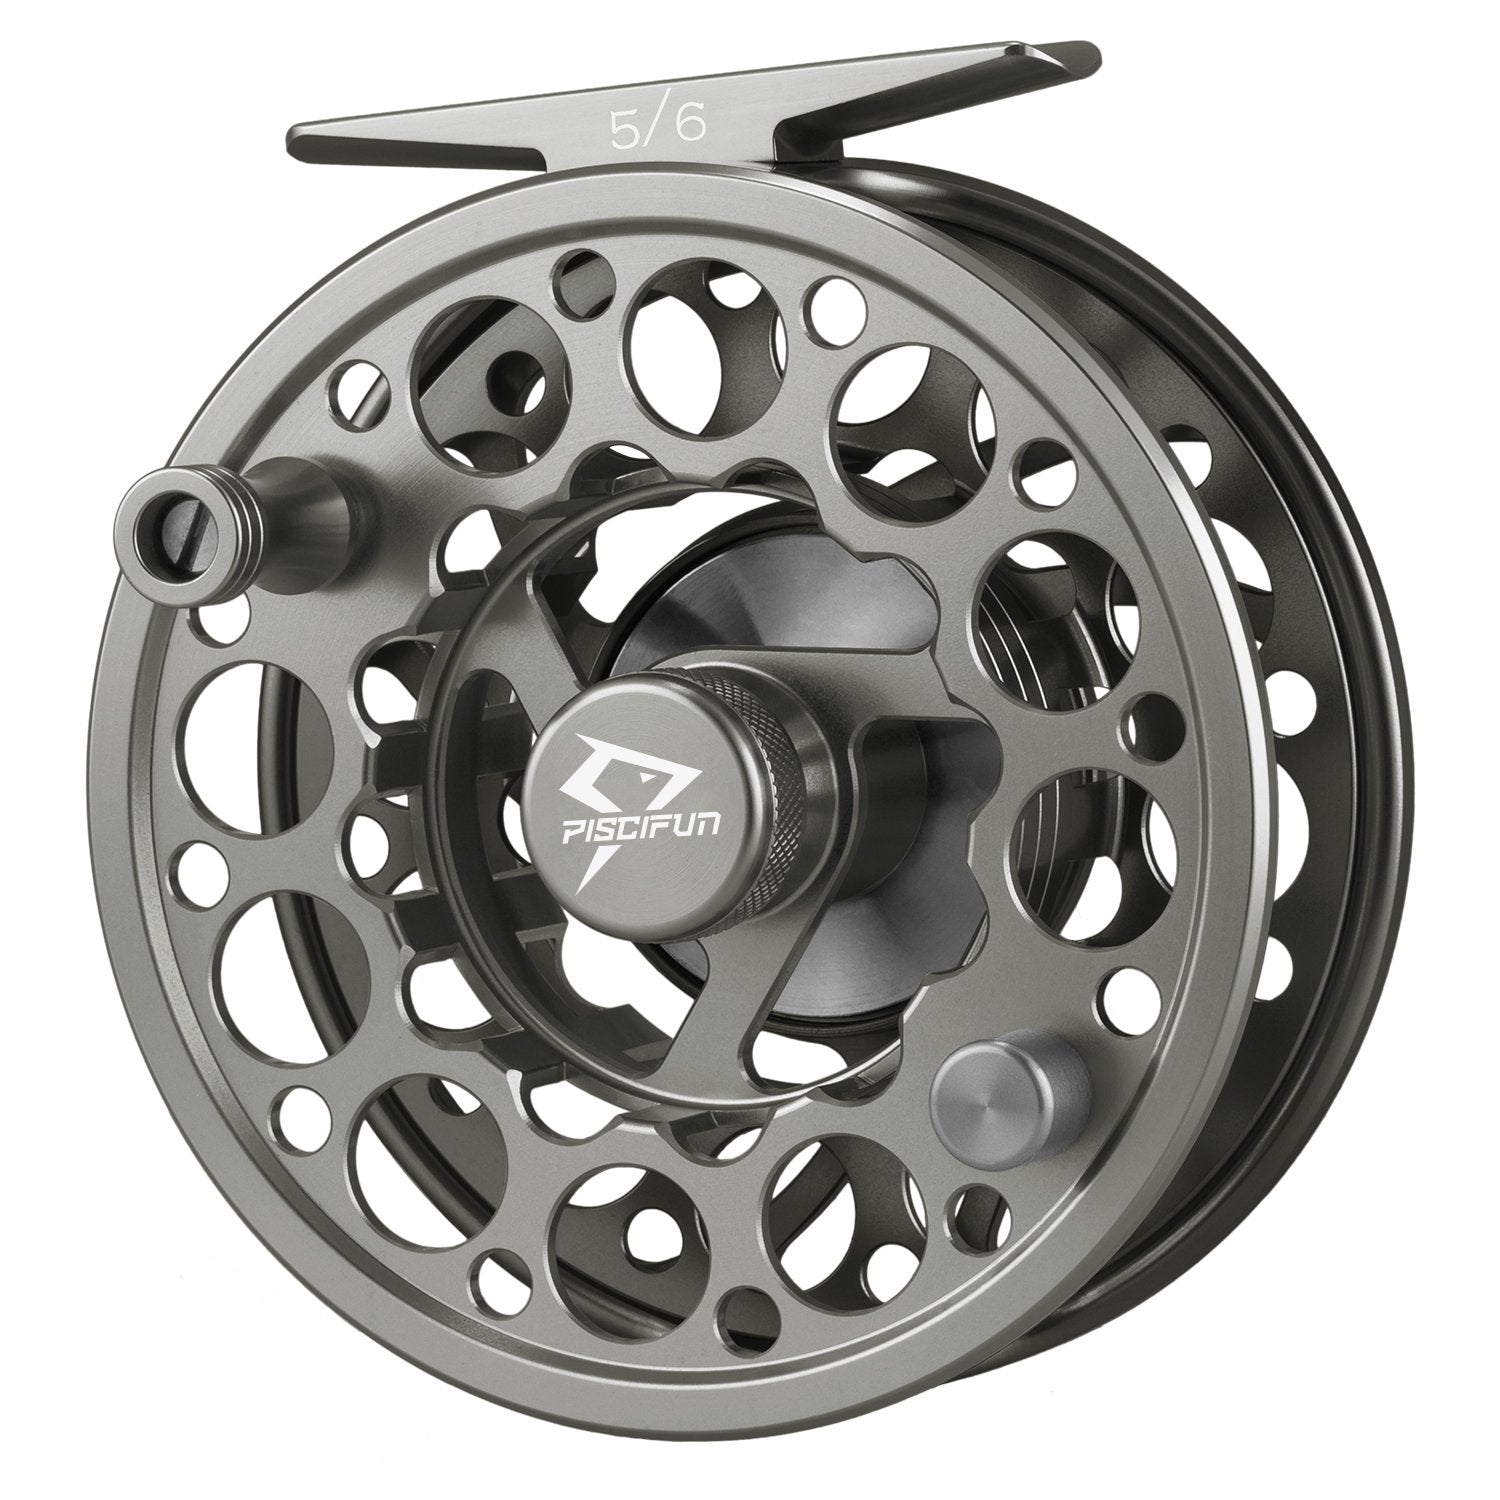 Piscifun Platte Fully Sealed Drag Large Arbor Fly Fishing Reel with  CNC-machined Aluminum Alloy Body Fly Fishing Gear 5/6 Ice Blue, Reels -   Canada